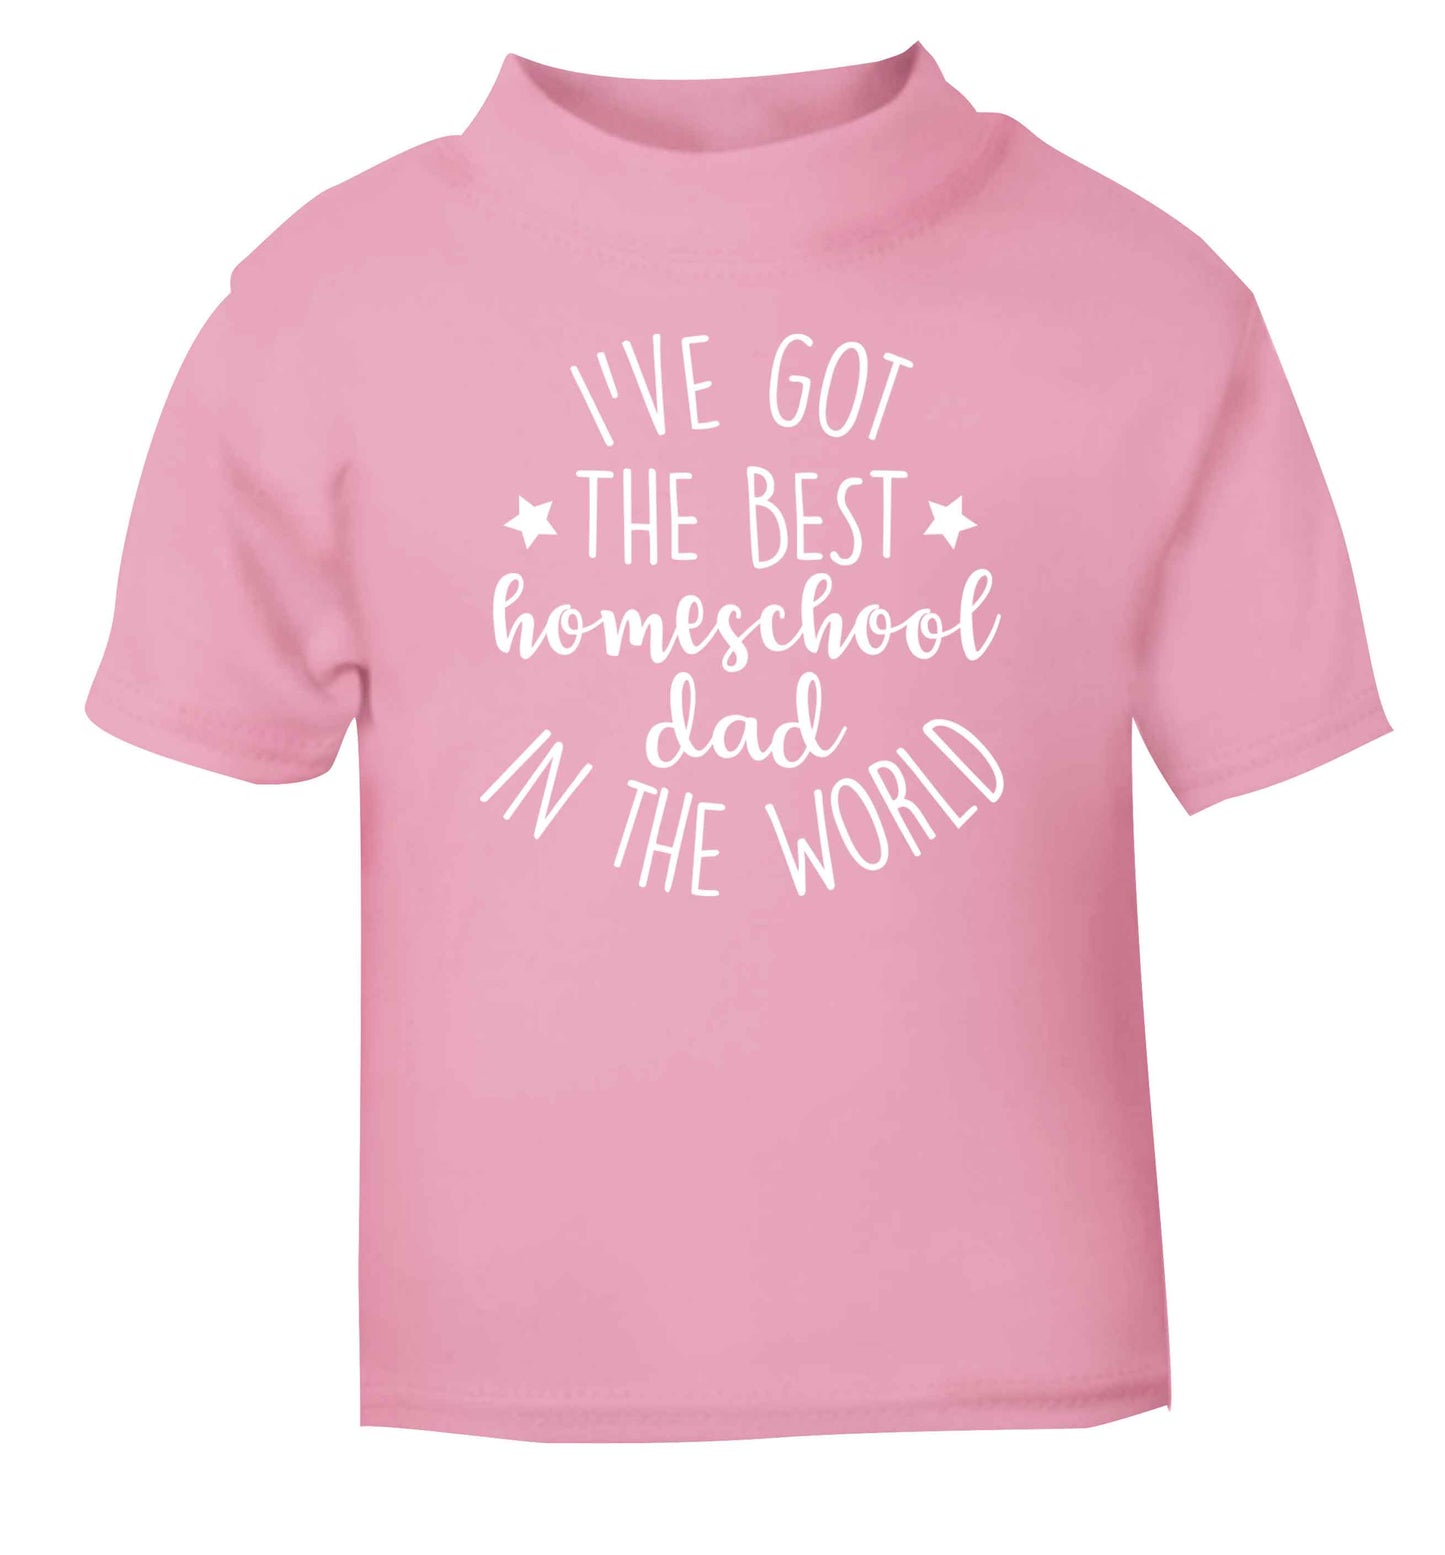 I've got the best homeschool dad in the world light pink Baby Toddler Tshirt 2 Years